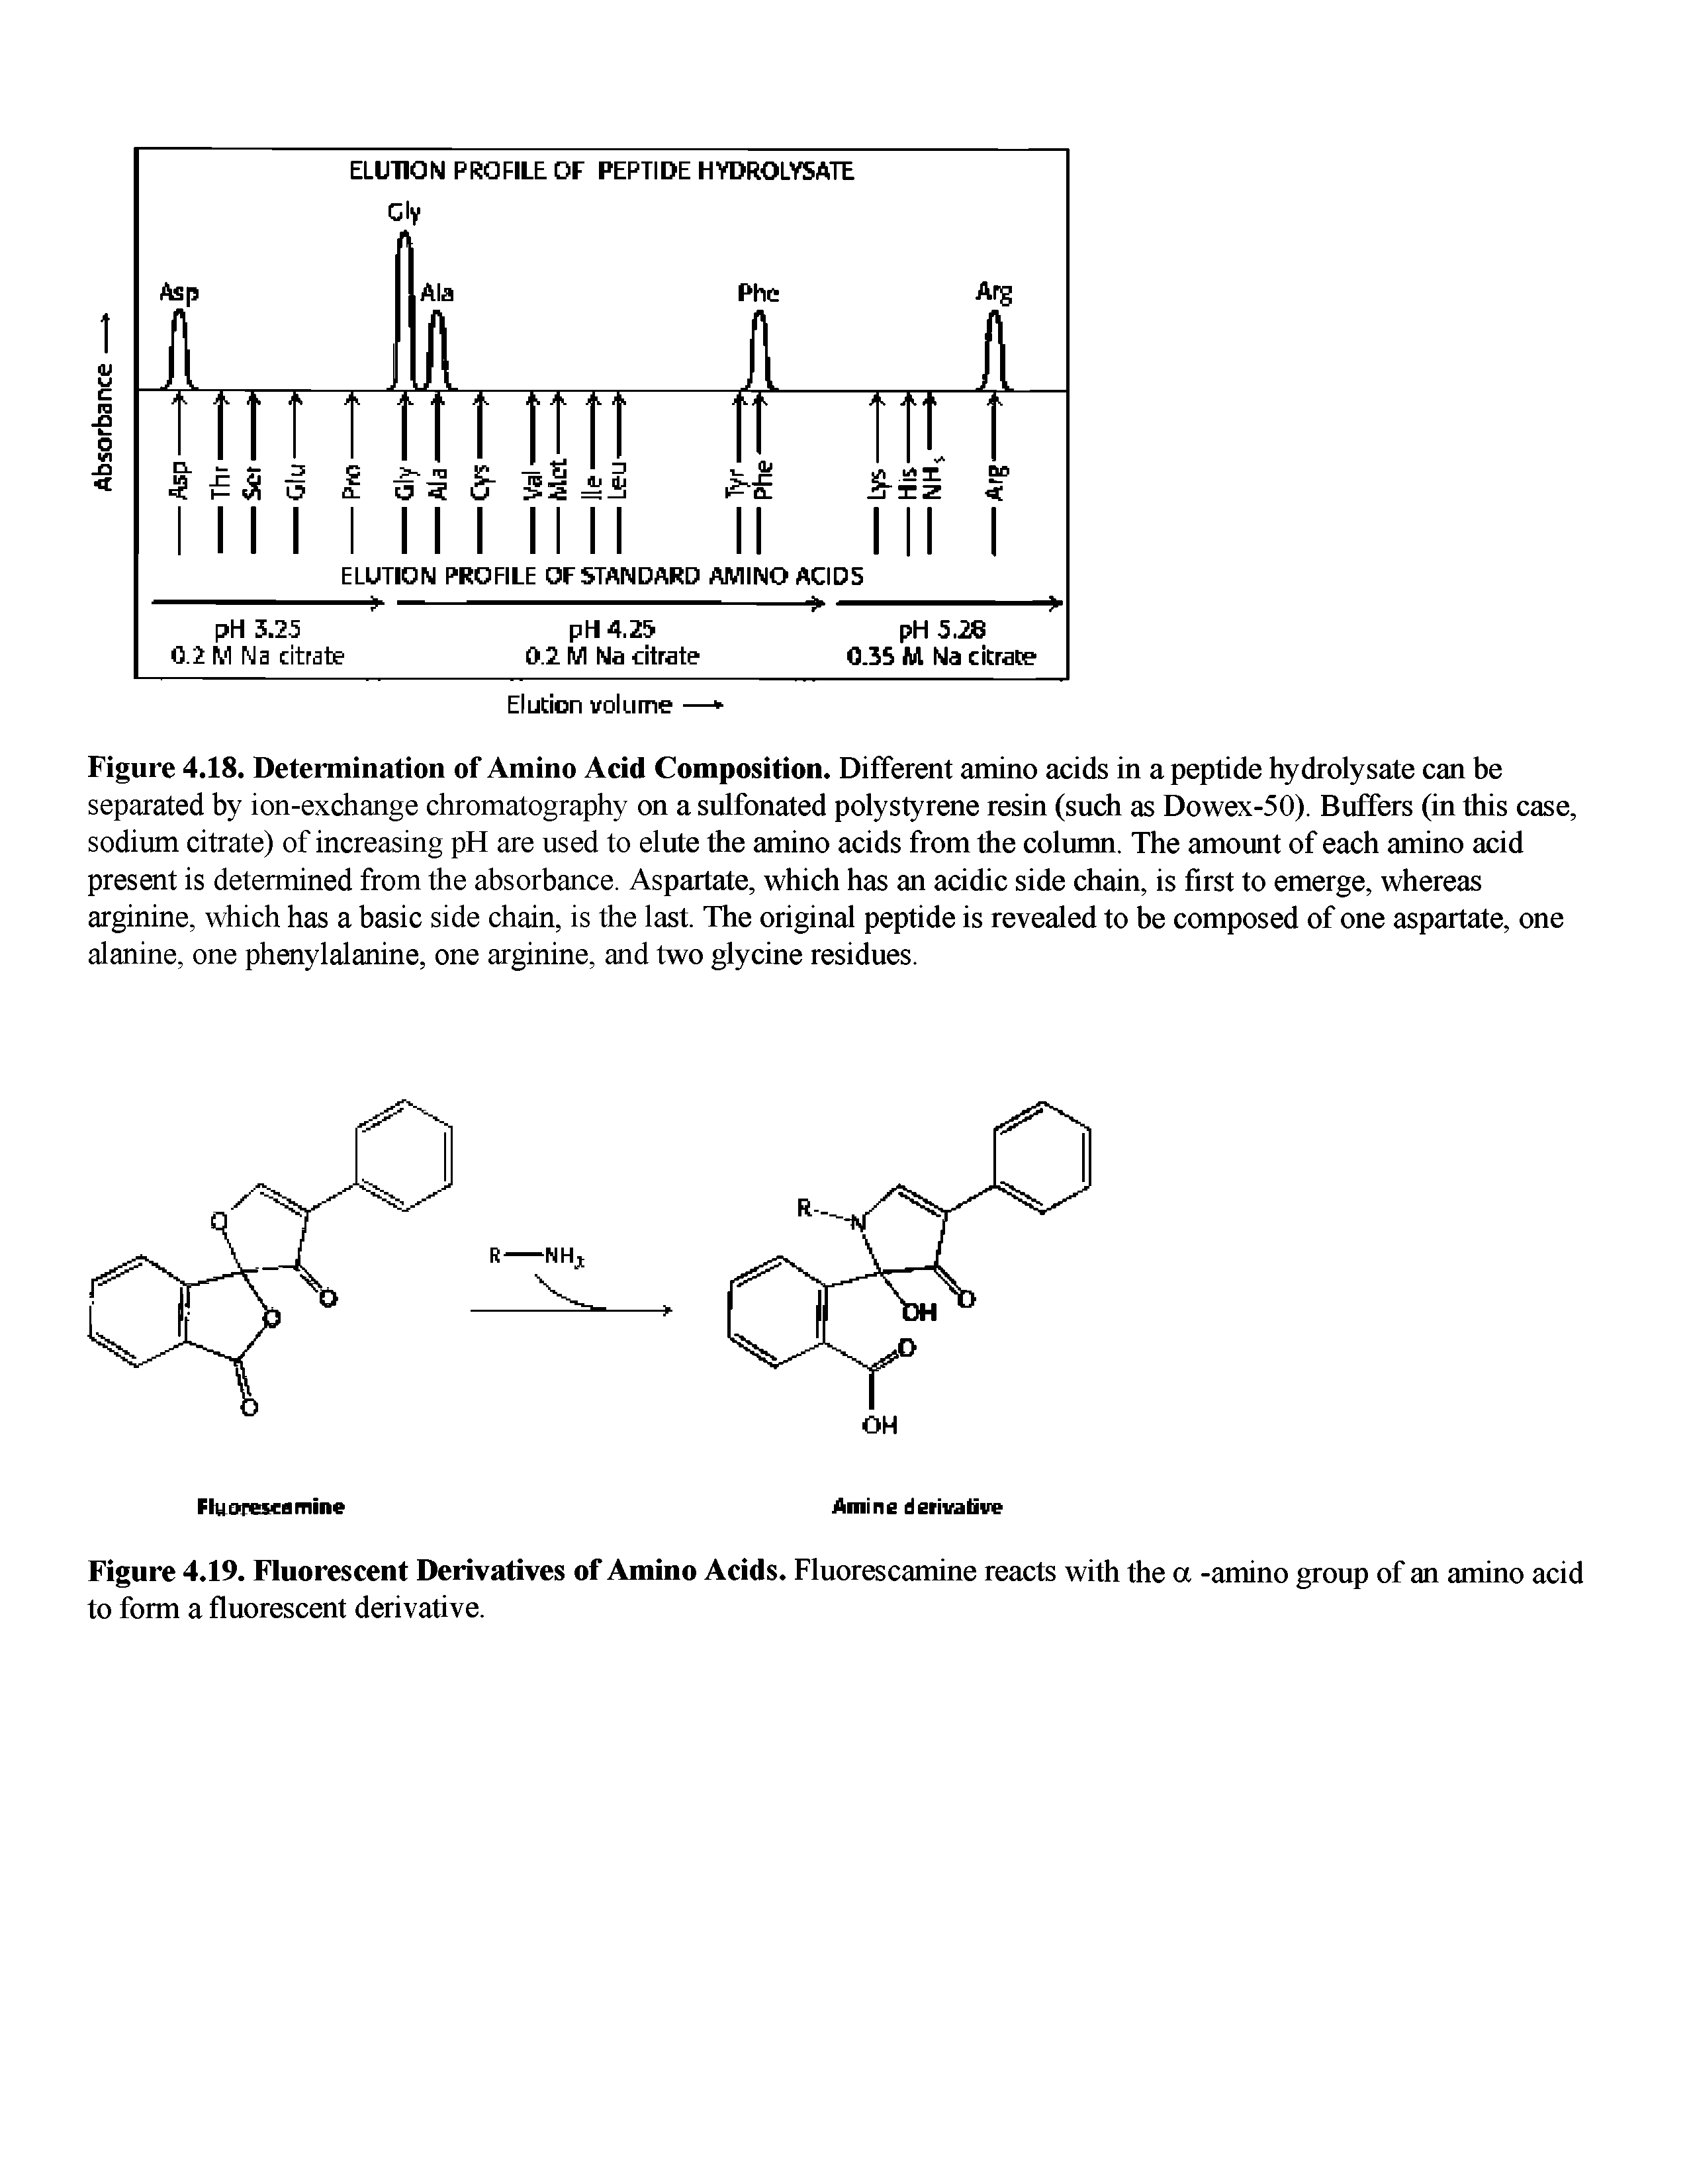 Figure 4.19. Fluorescent Derivatives of Amino Acids. Fluorescamine reacts with the a -amino group of an amino acid to form a fluorescent derivative.